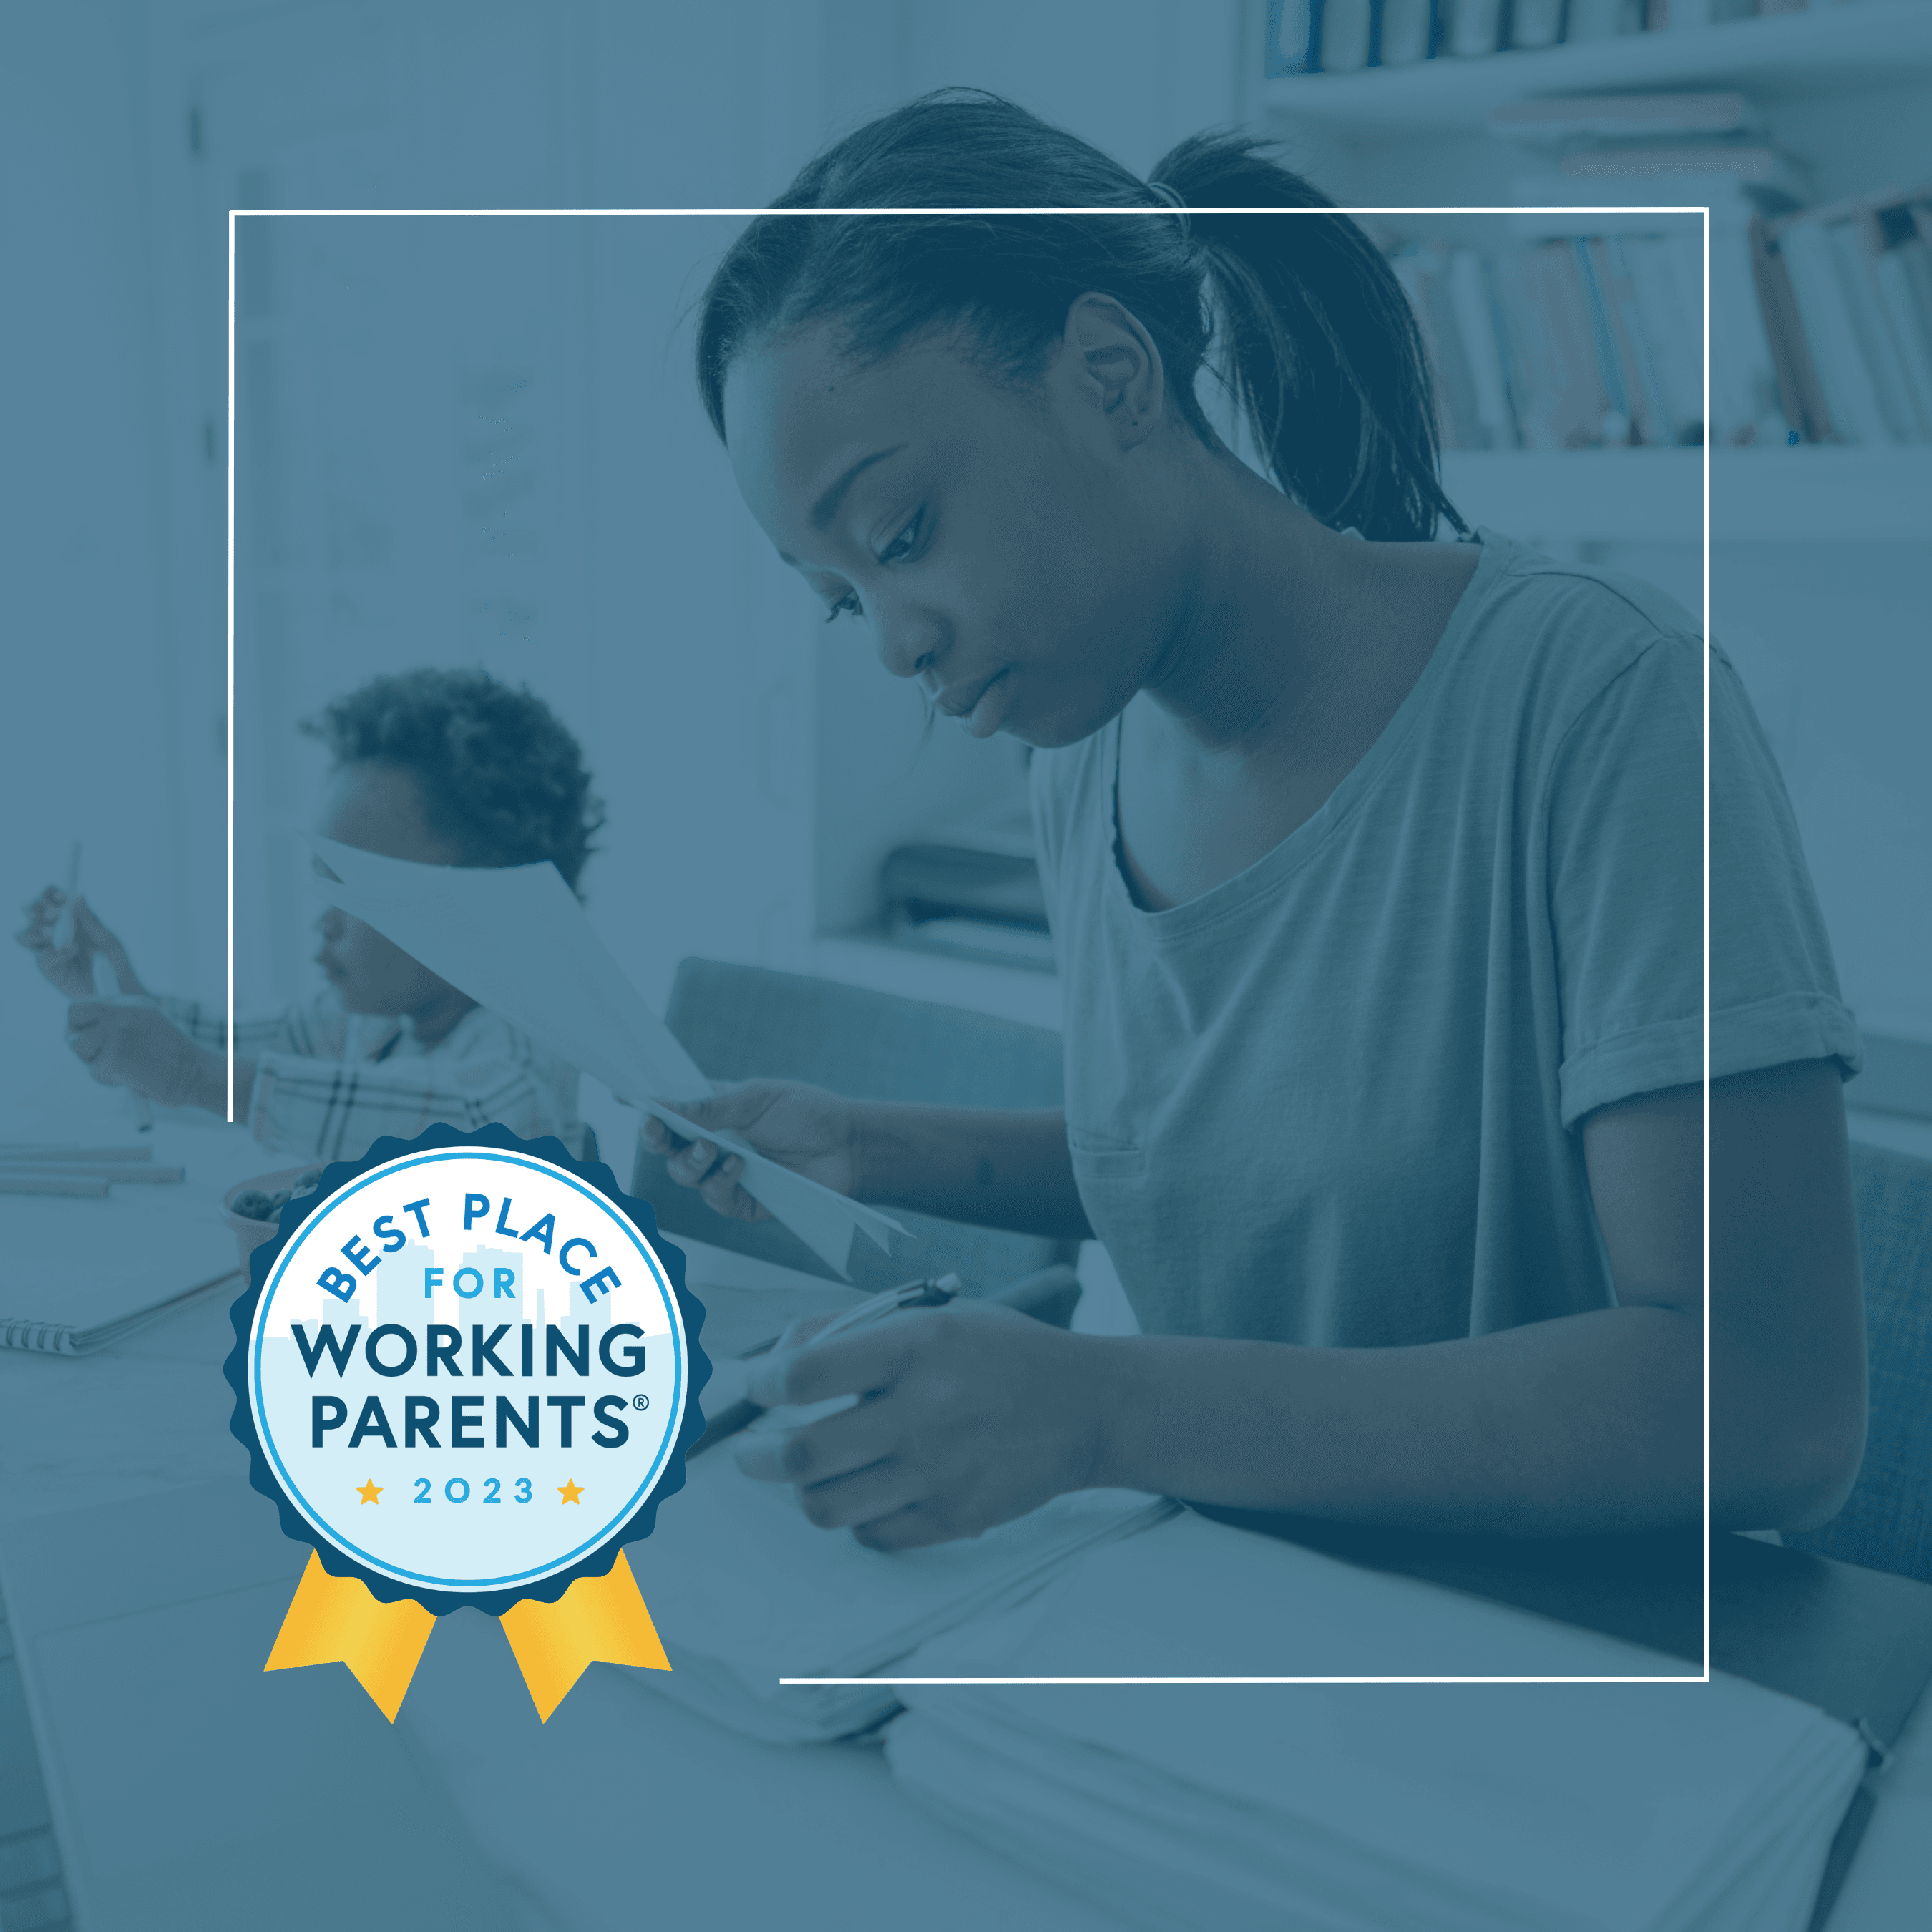 United Way of West TN Named a 2023 Best Place for Working Parents